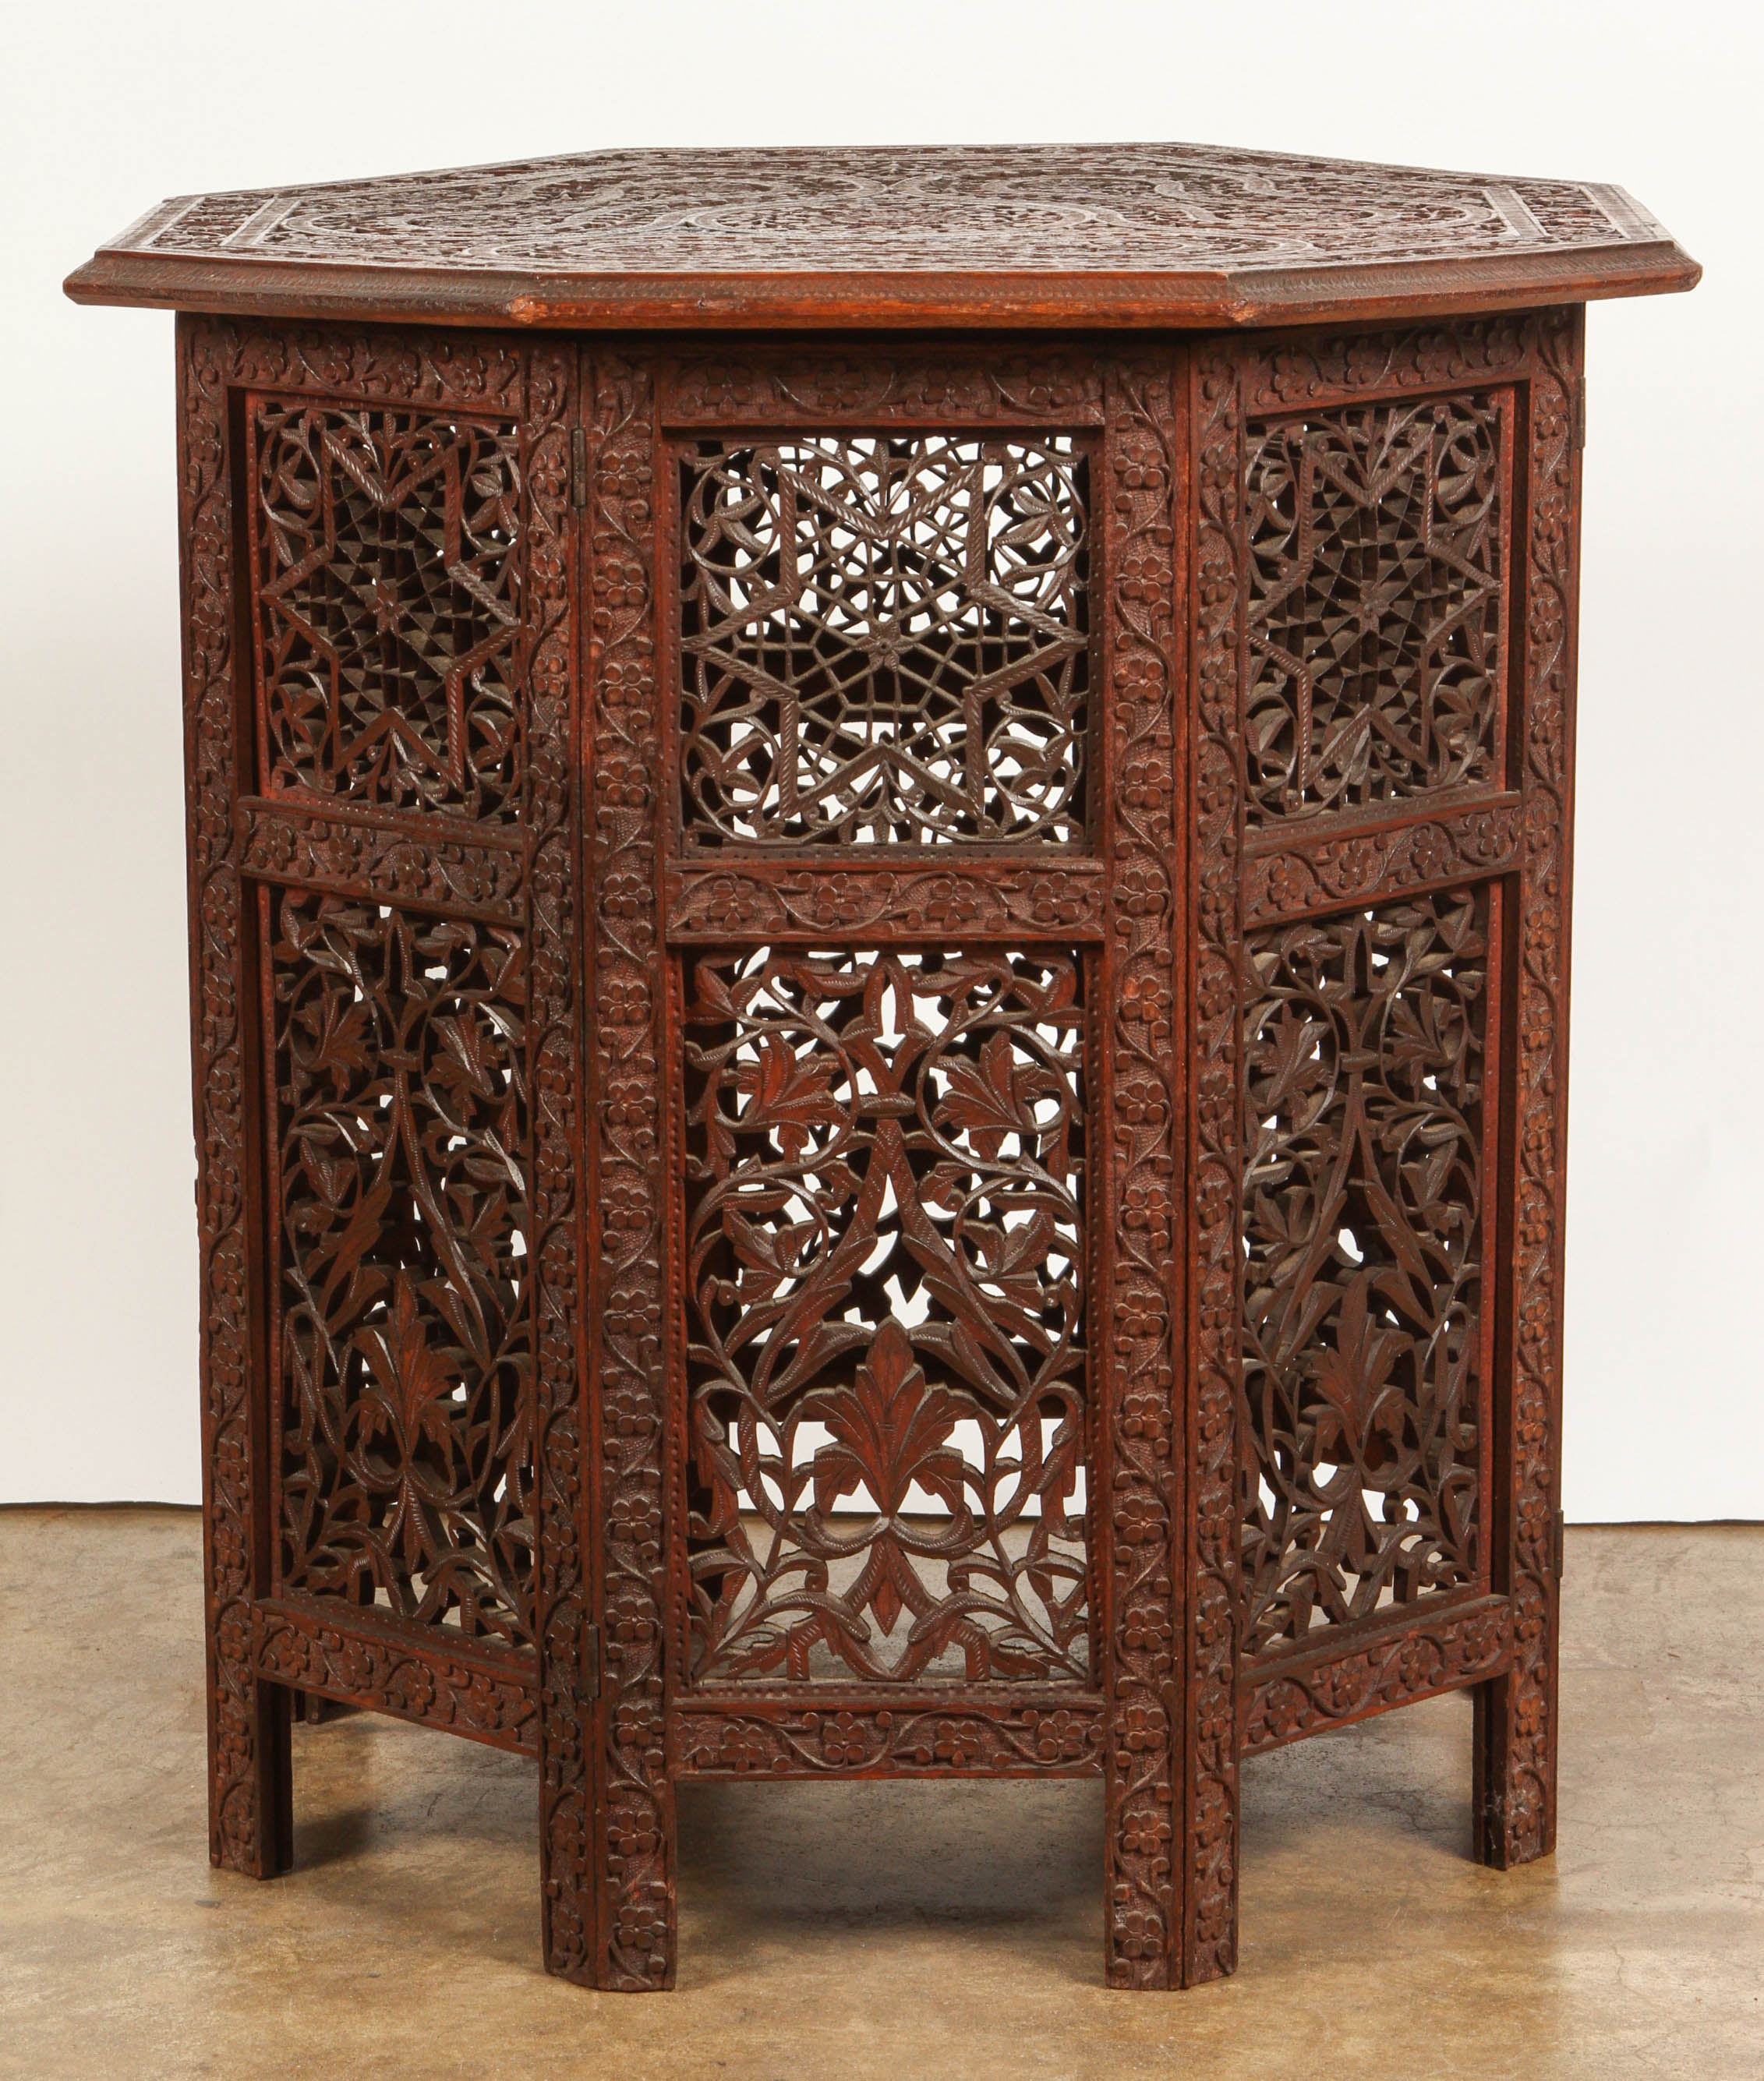 An eight-sided table from Syria in a red colored wood, elaborately and finely carved in leaf and floral patterns, as well as a row of hexagon shapes at the top of the base.